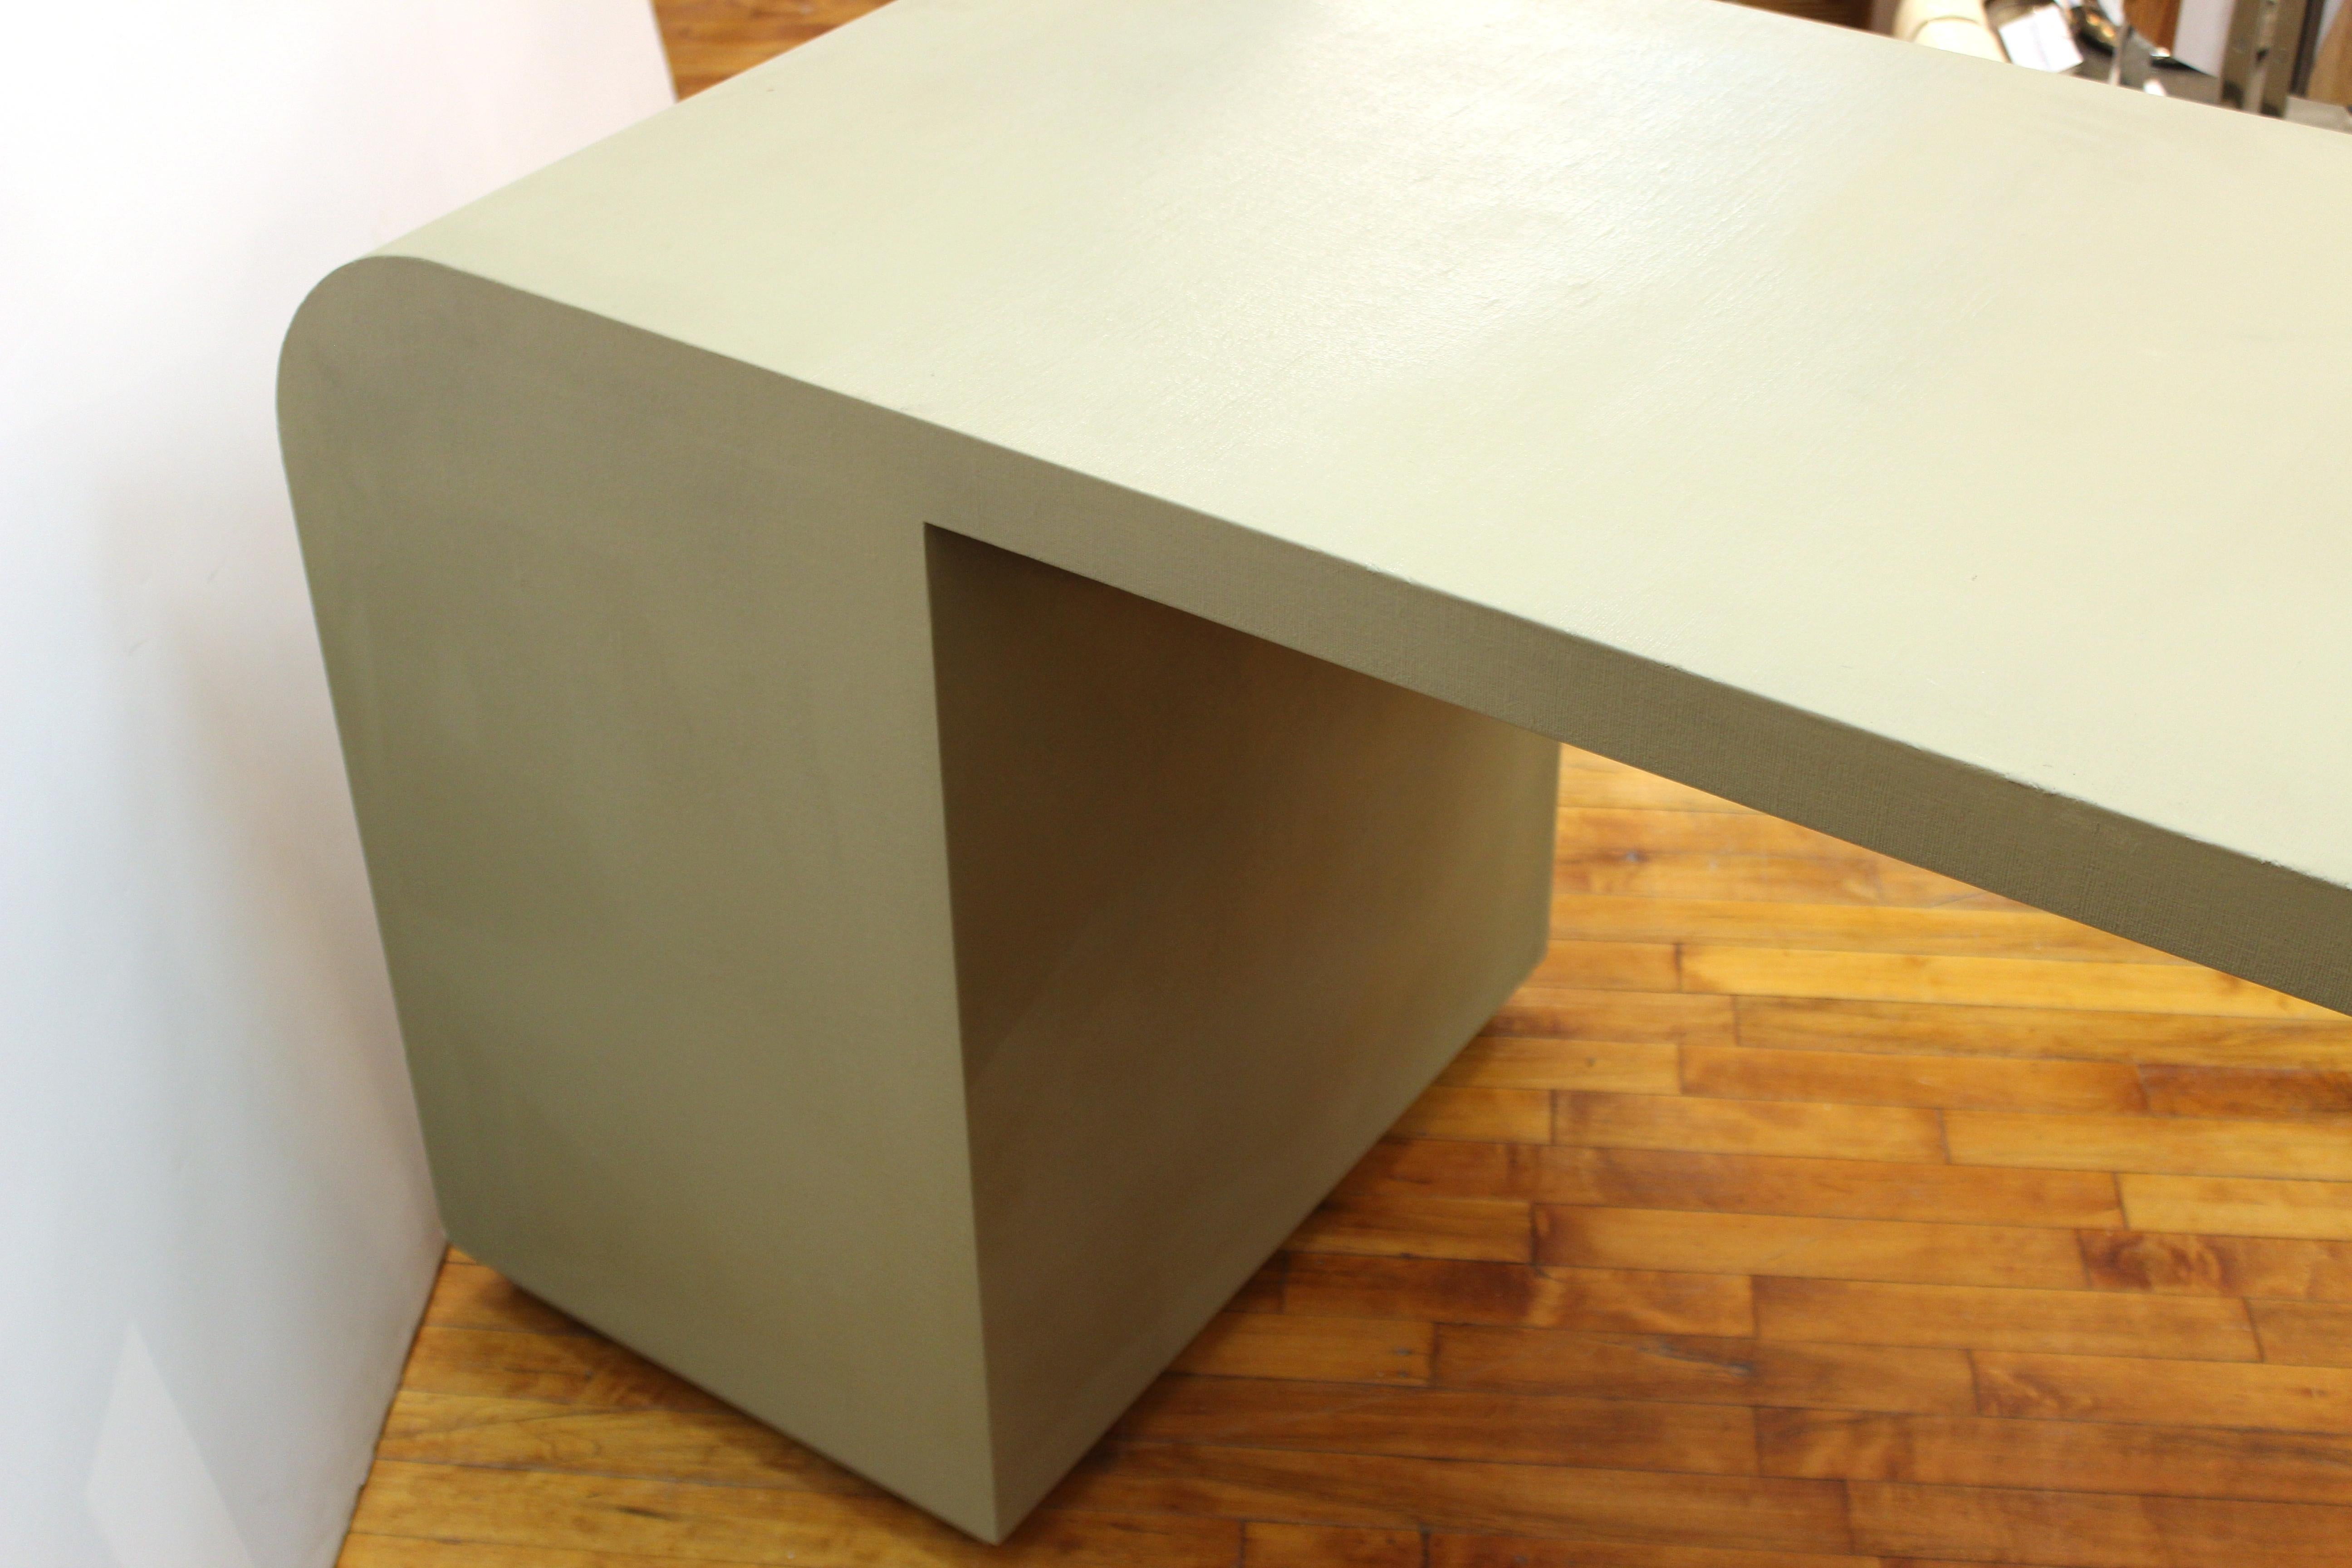 Late 20th Century Karl Springer Style Postmodern Waterfall Desk with Grass-Cloth Surface